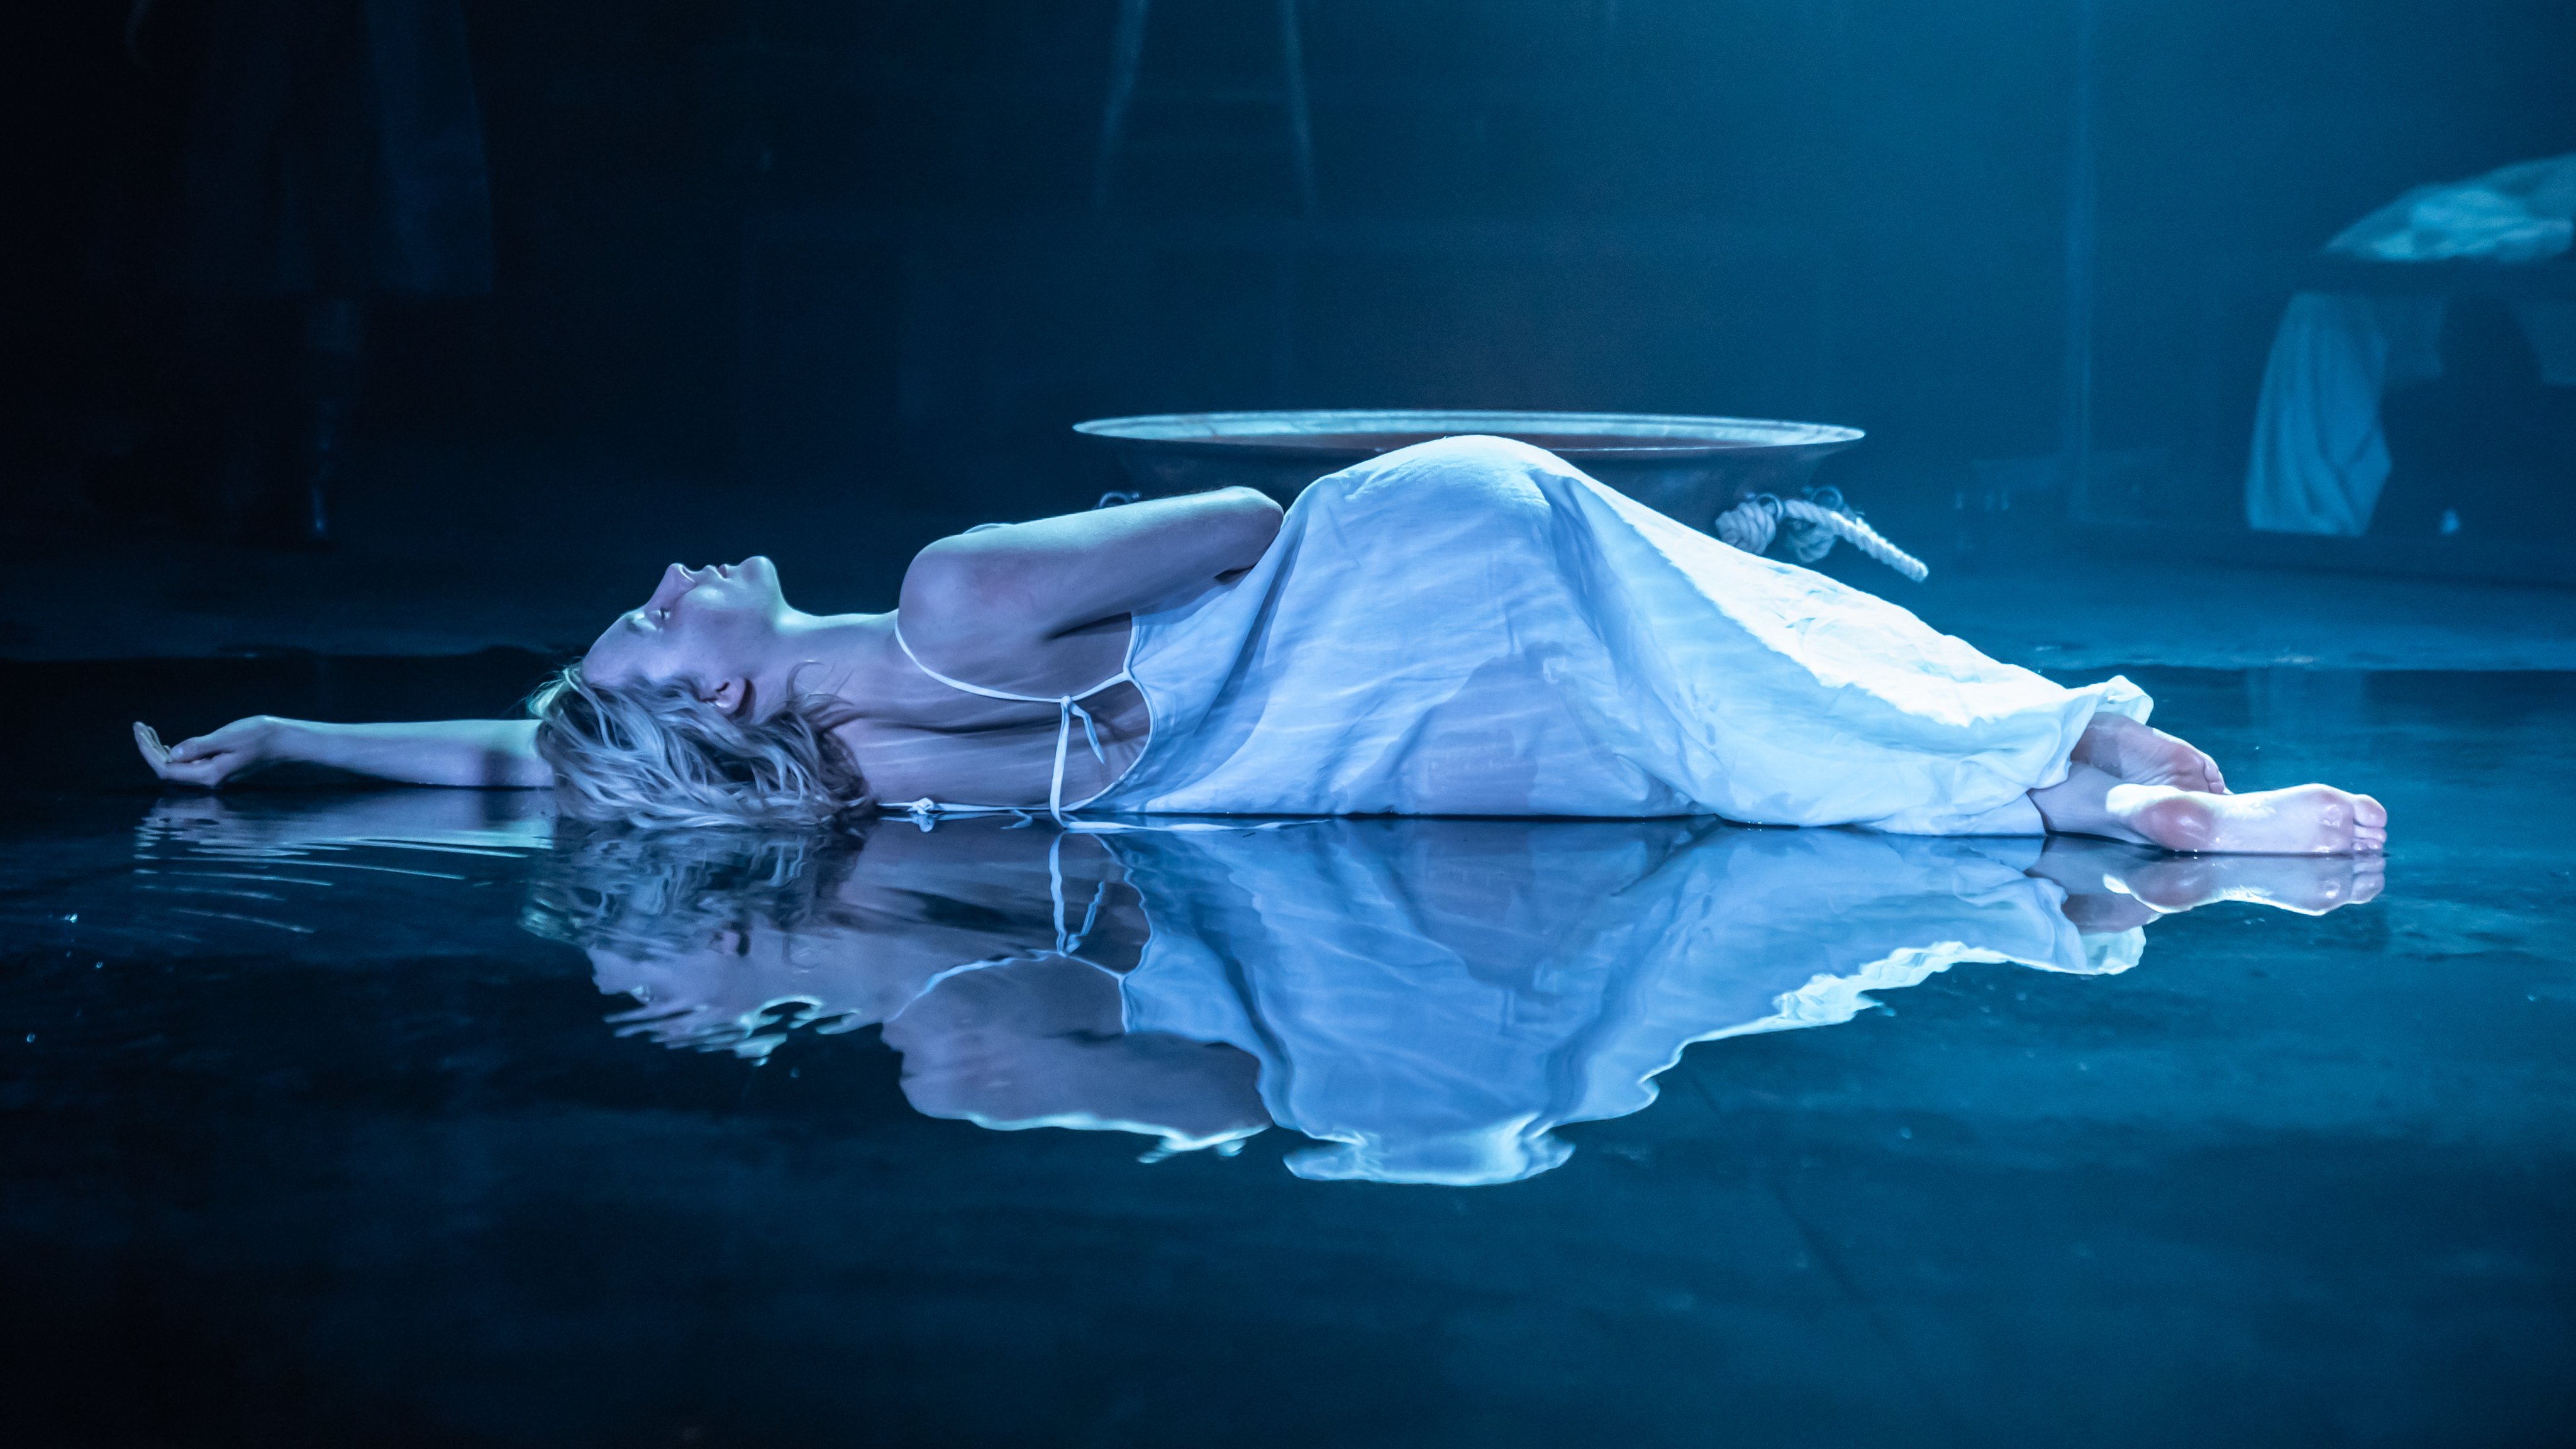 Lady Macbeth (Saoirse Ronan) lays down on a flooded stage. She wears a white dress and has her eyes closed. We see her reflection in the water.